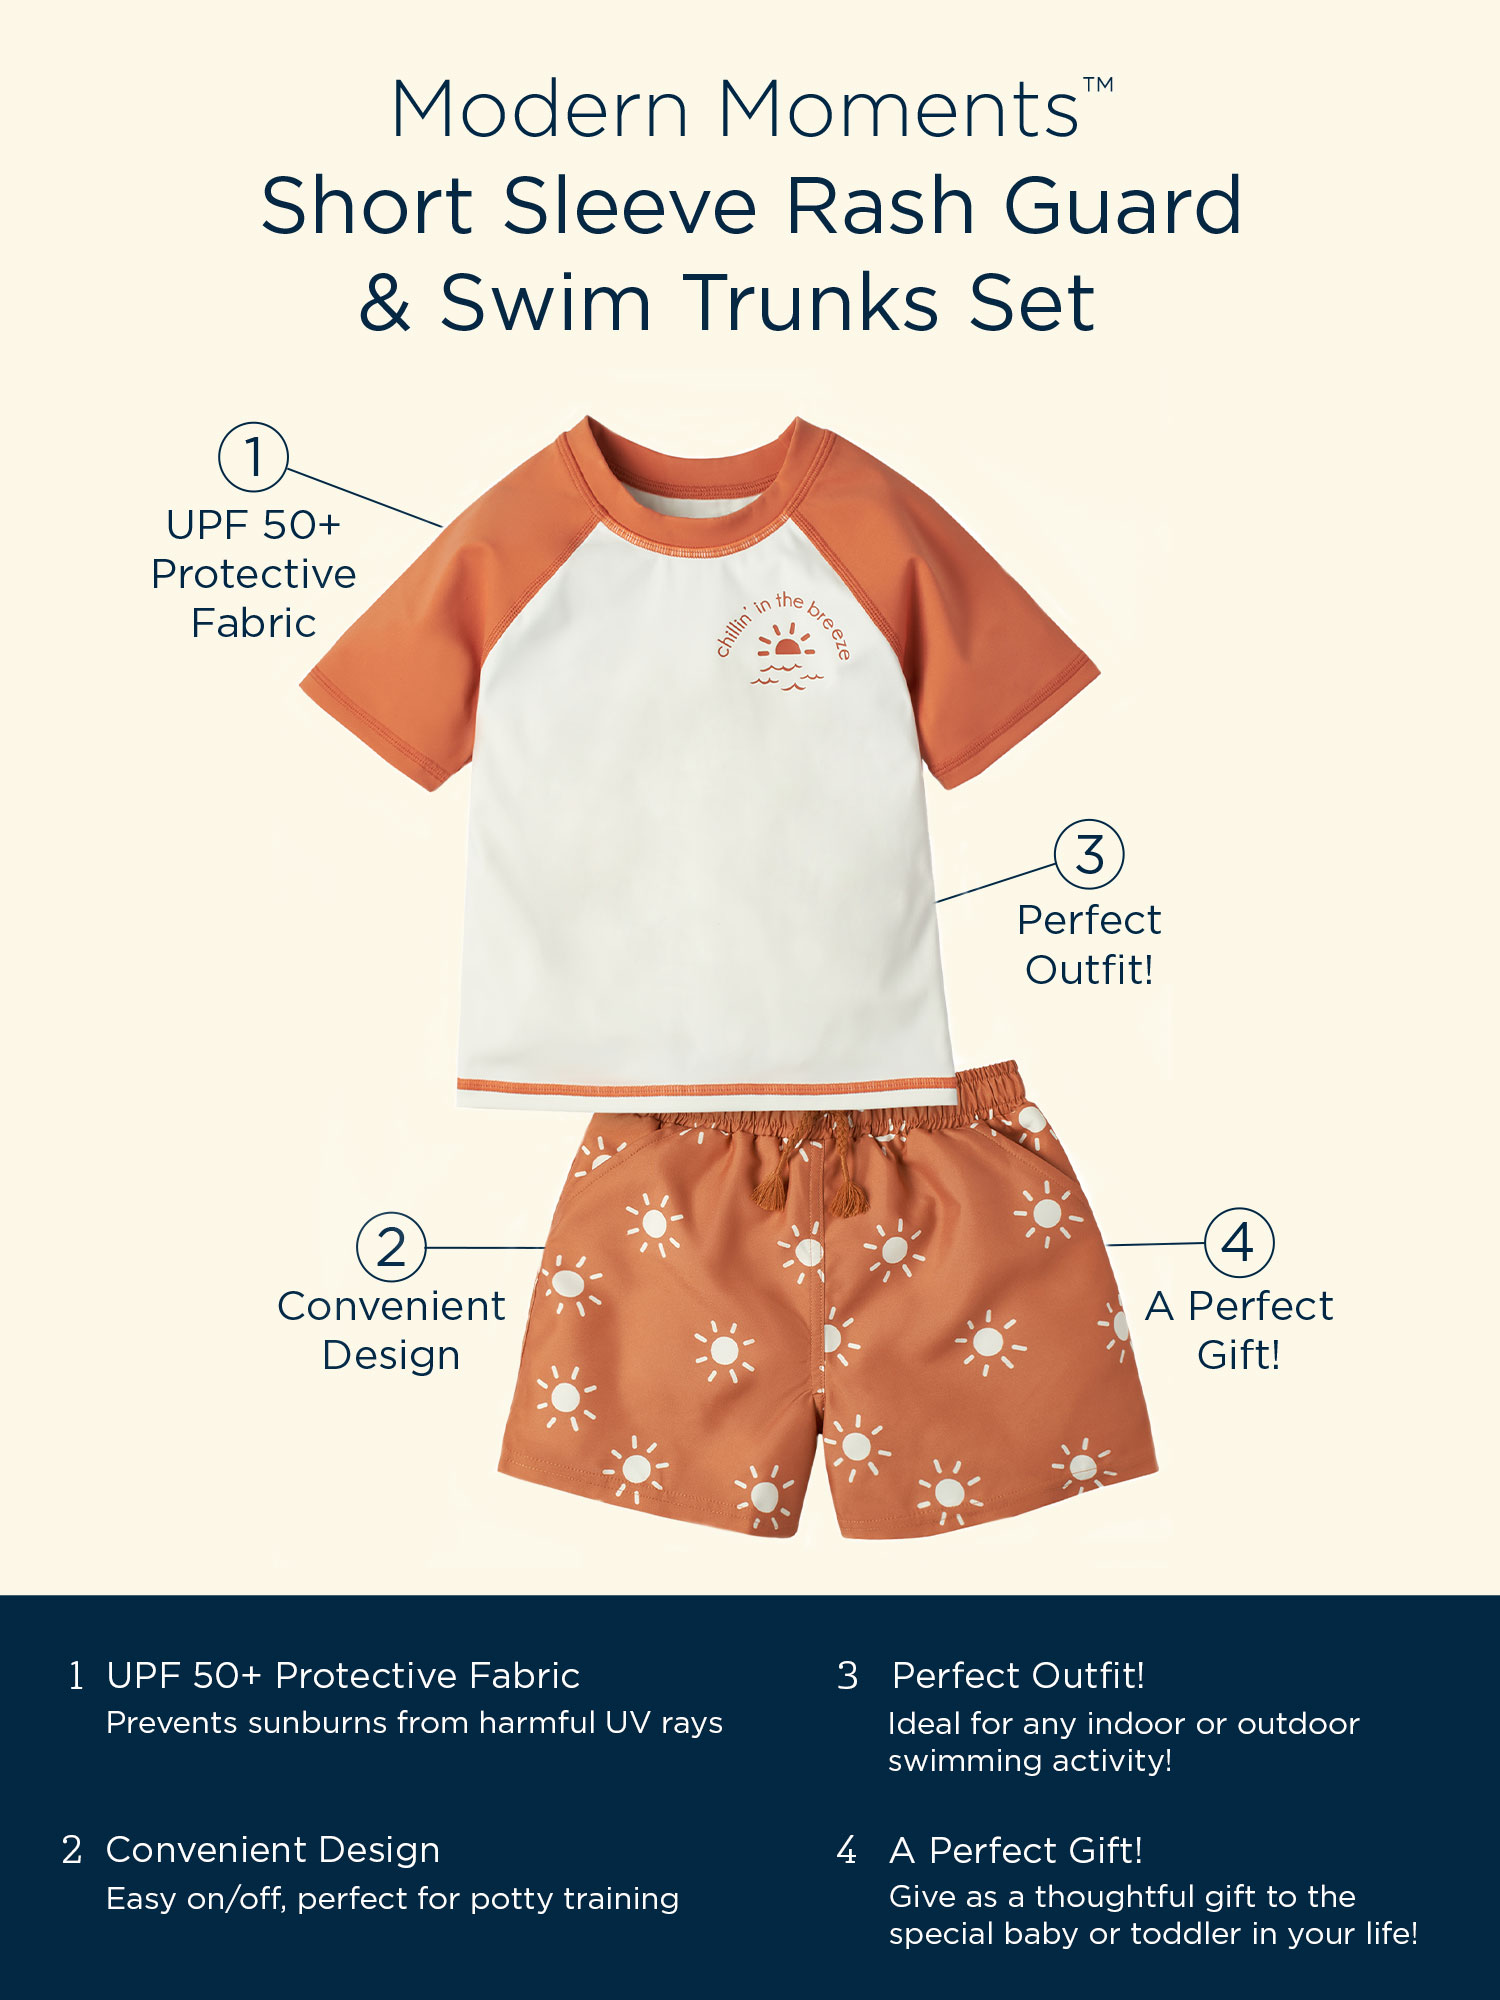 Modern Moments By Gerber Baby and Toddler Boy Rashguard and Swim Trunks Set, 12M-5T - image 11 of 12